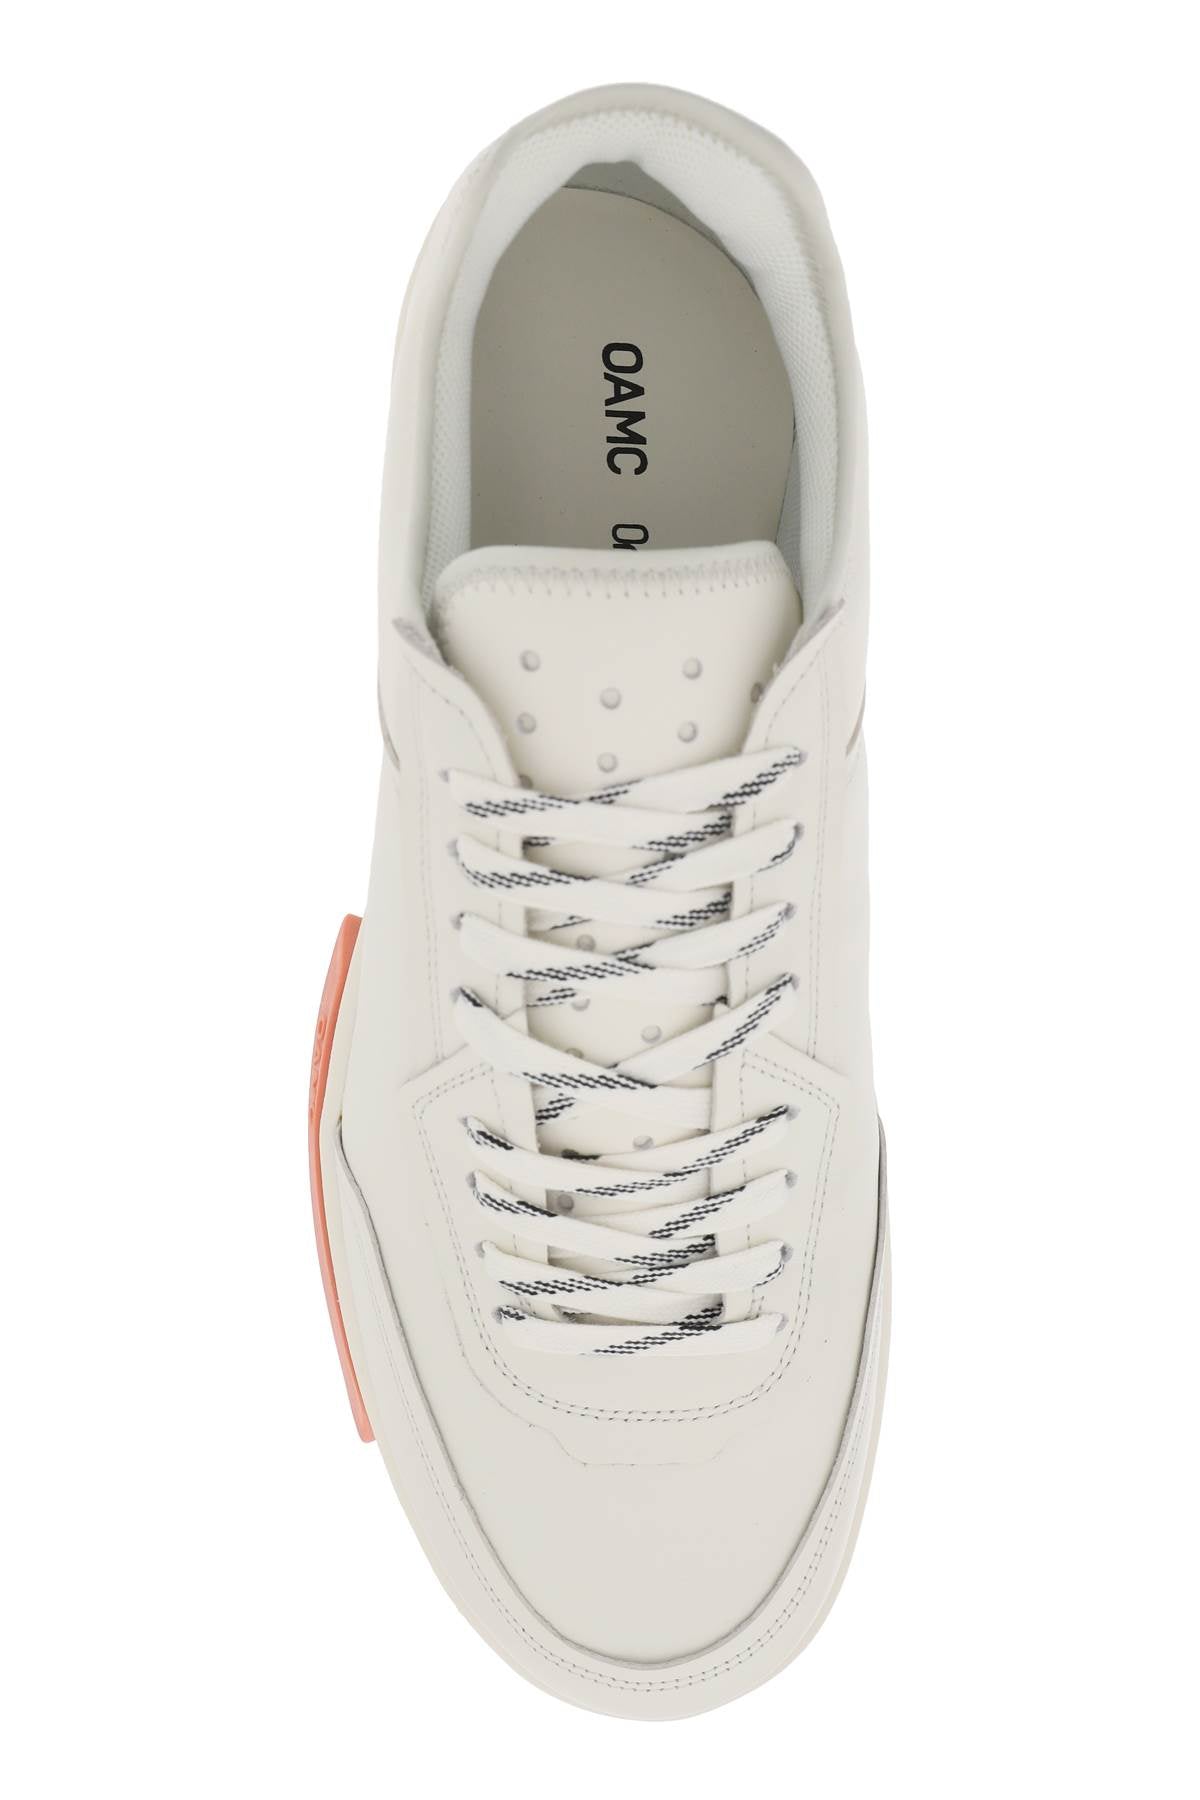 Oamc 'cosmos cupsole' sneakers-1